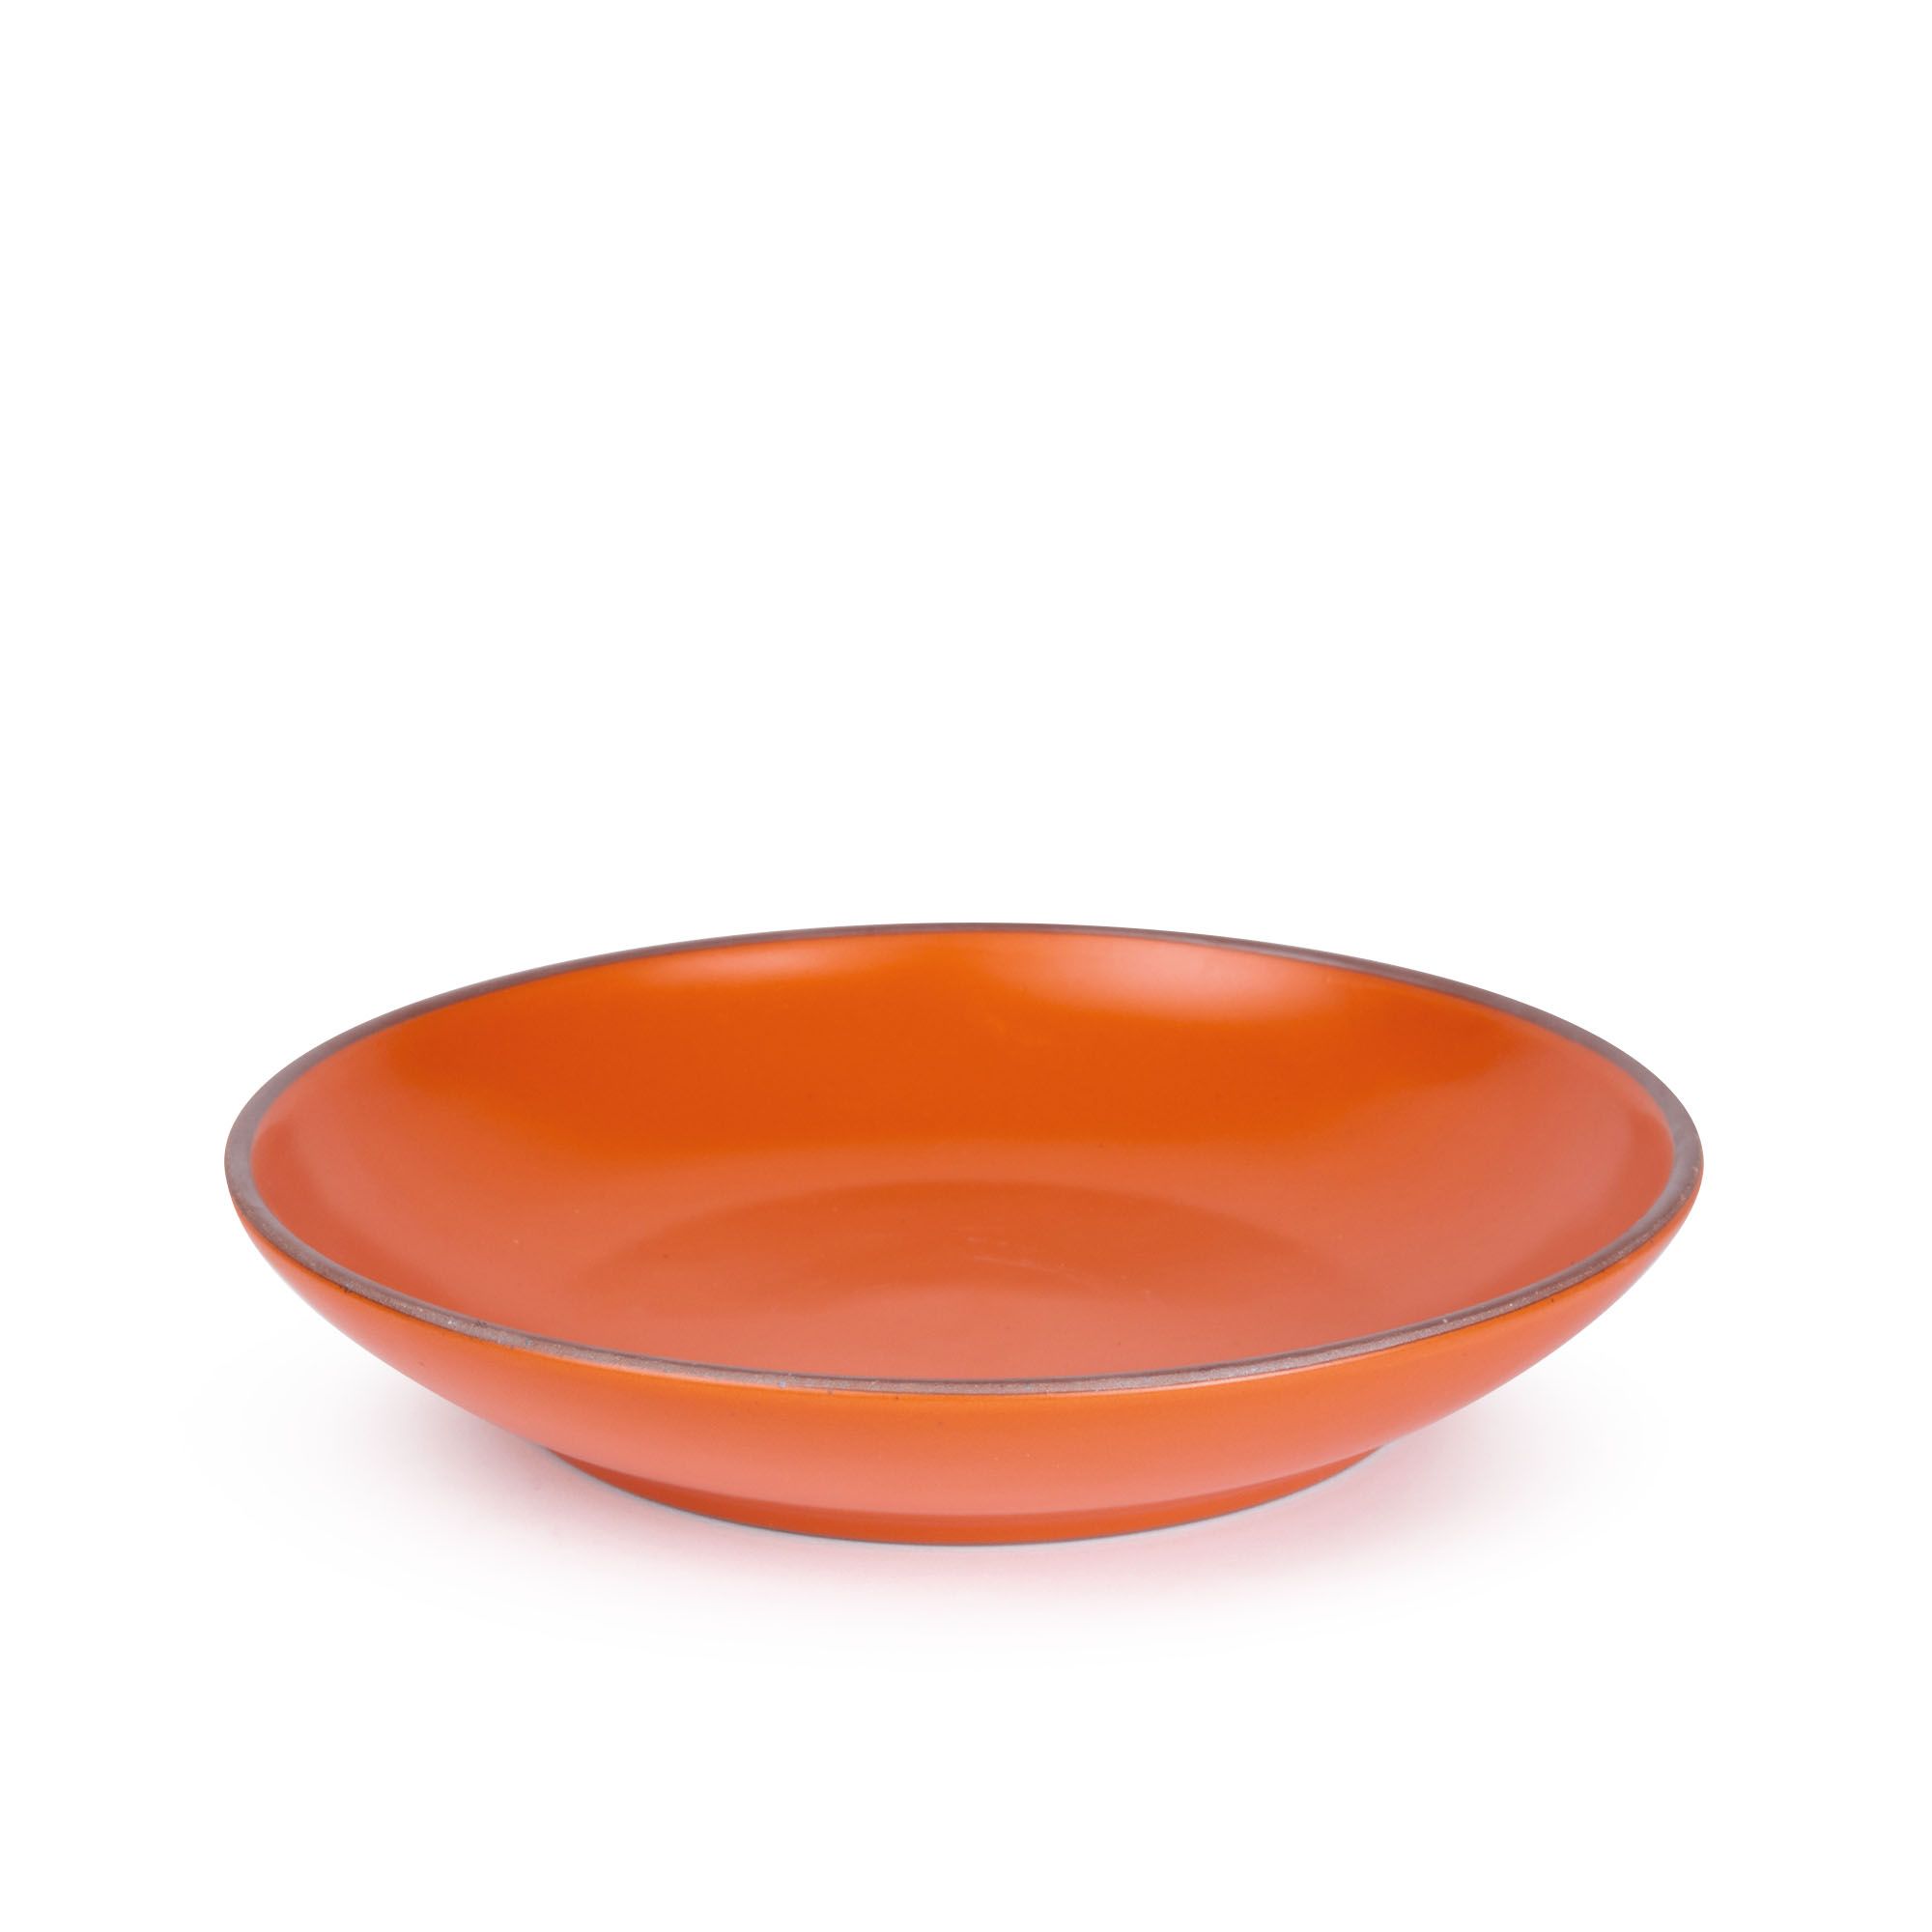 A large ceramic plate with a curved bowl edge in a bold orange color featuring iron speckles and an unglazed rim.